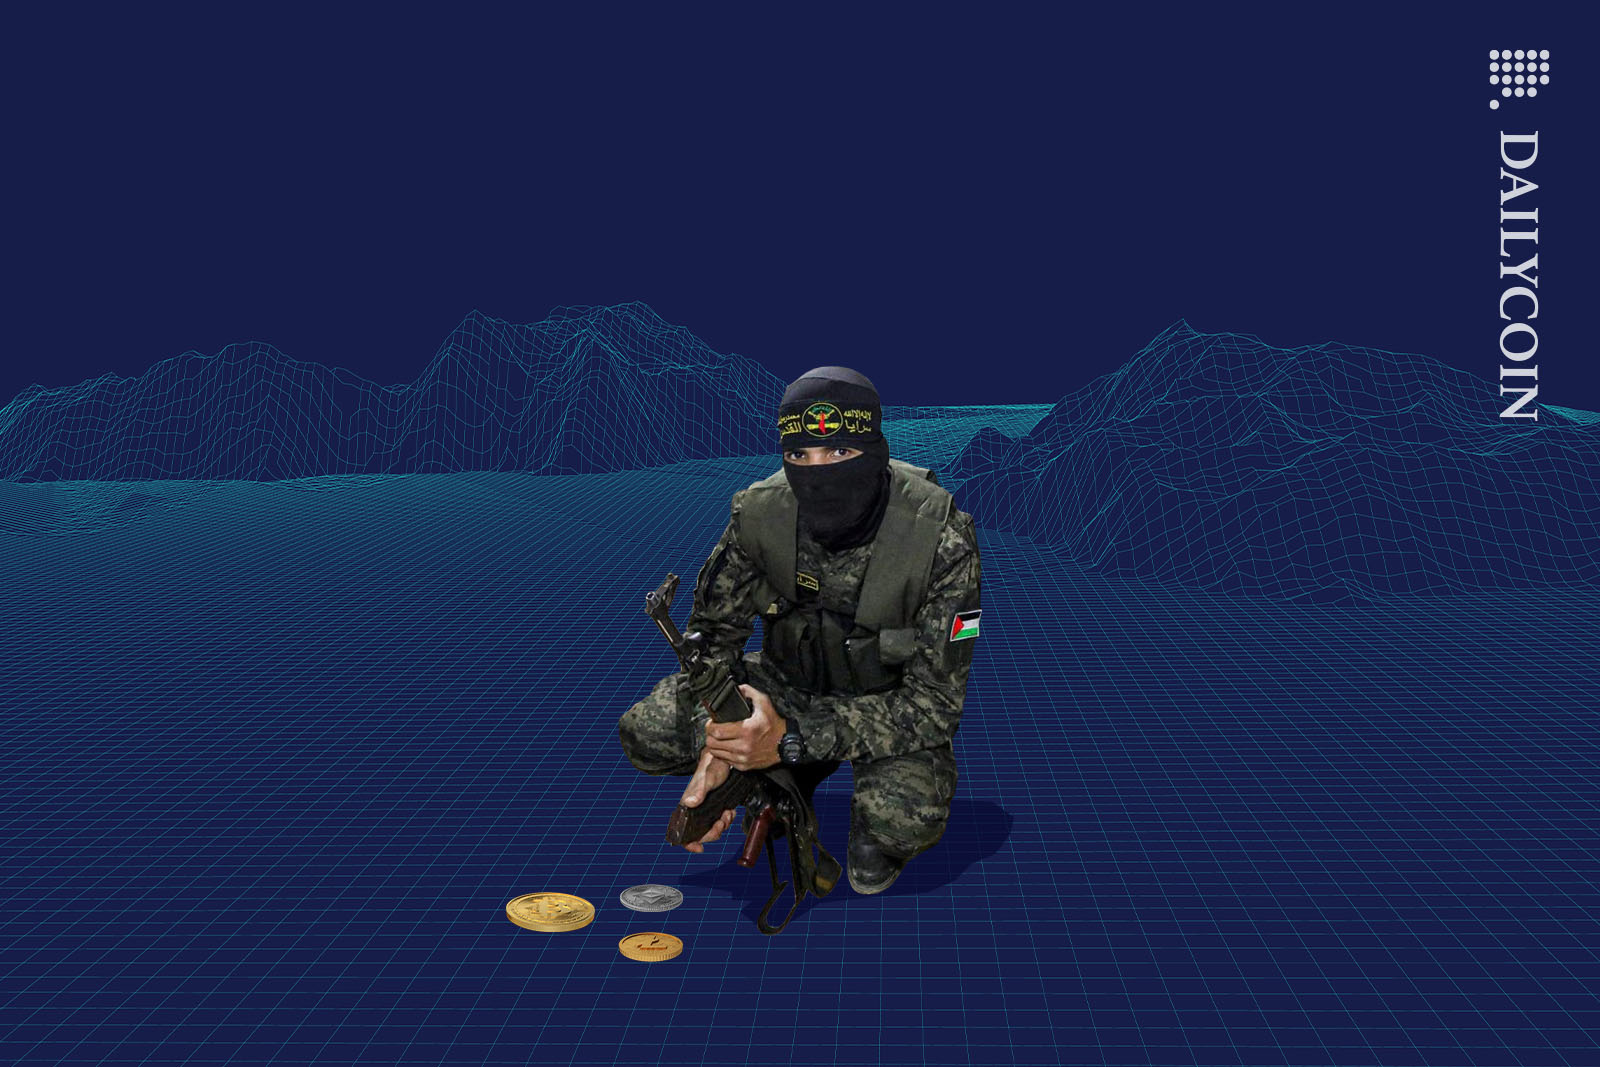 Hamas soldier squatting next to a few small crypto coins.